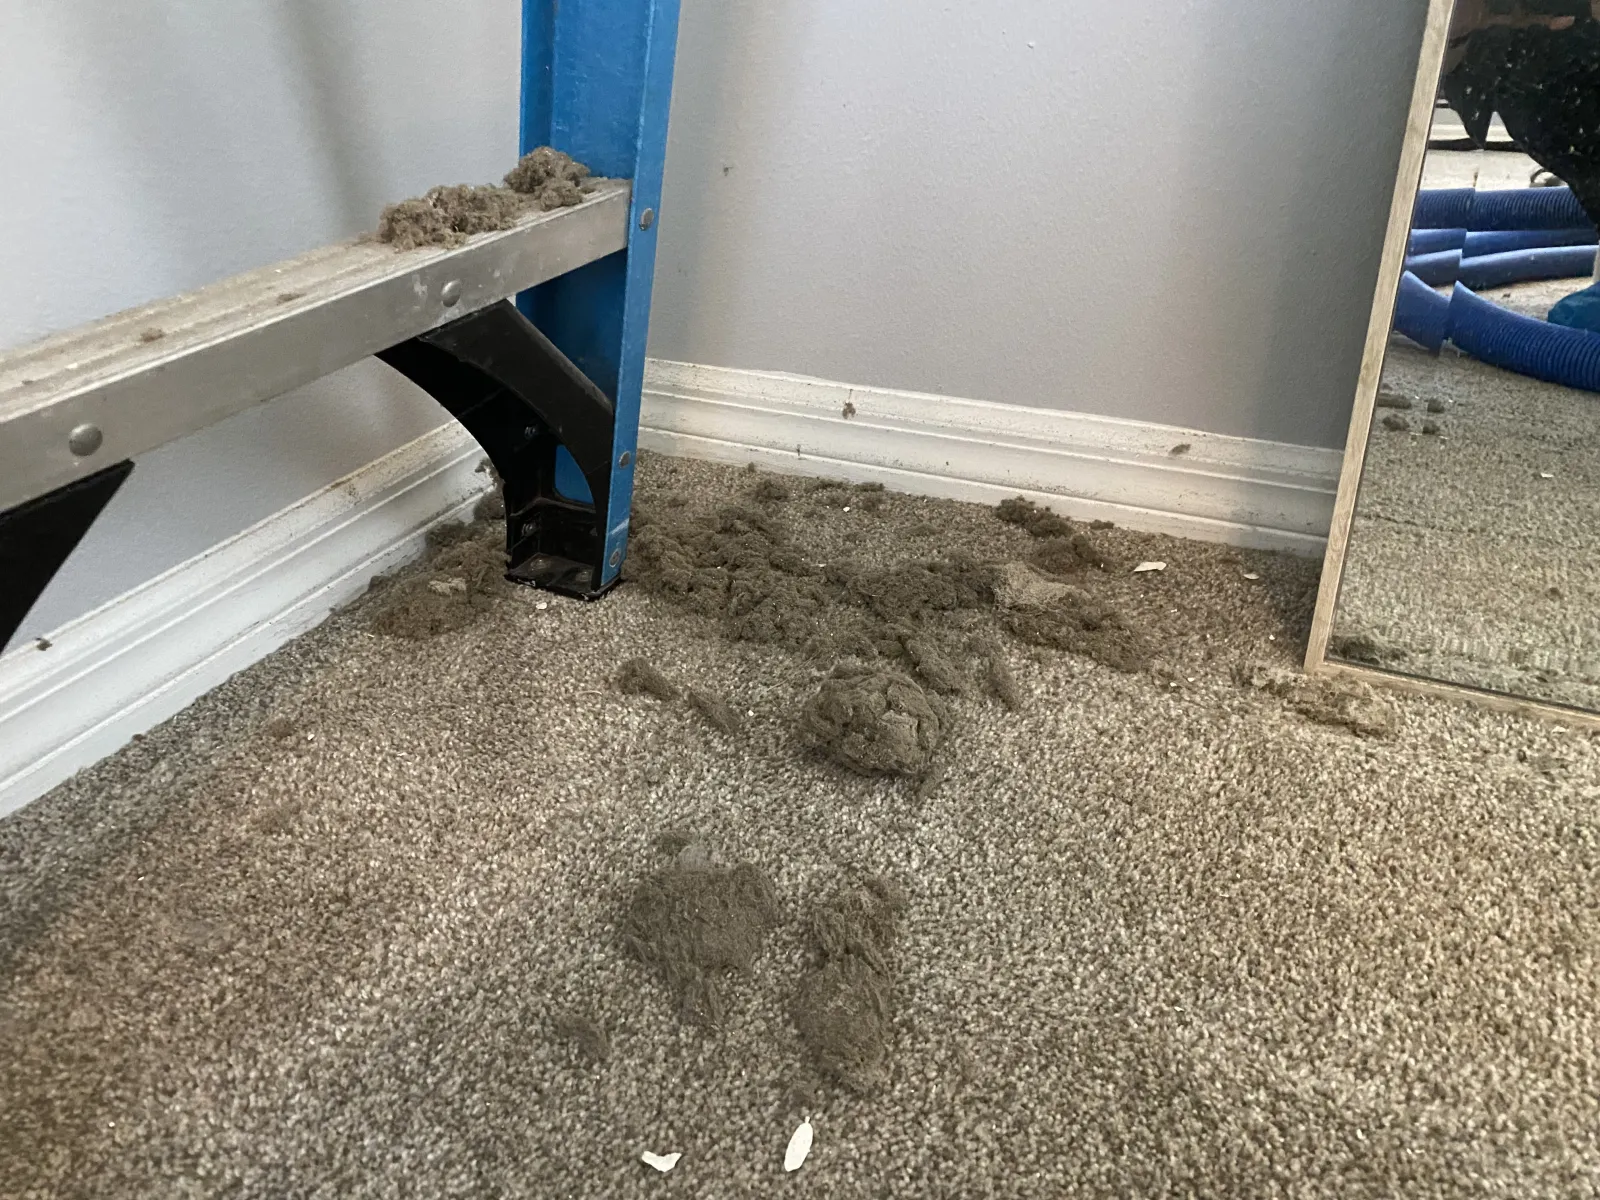 piles of dust bunnies on the floor after an air register was cleaned out from Zerorez professional air duct cleaning services